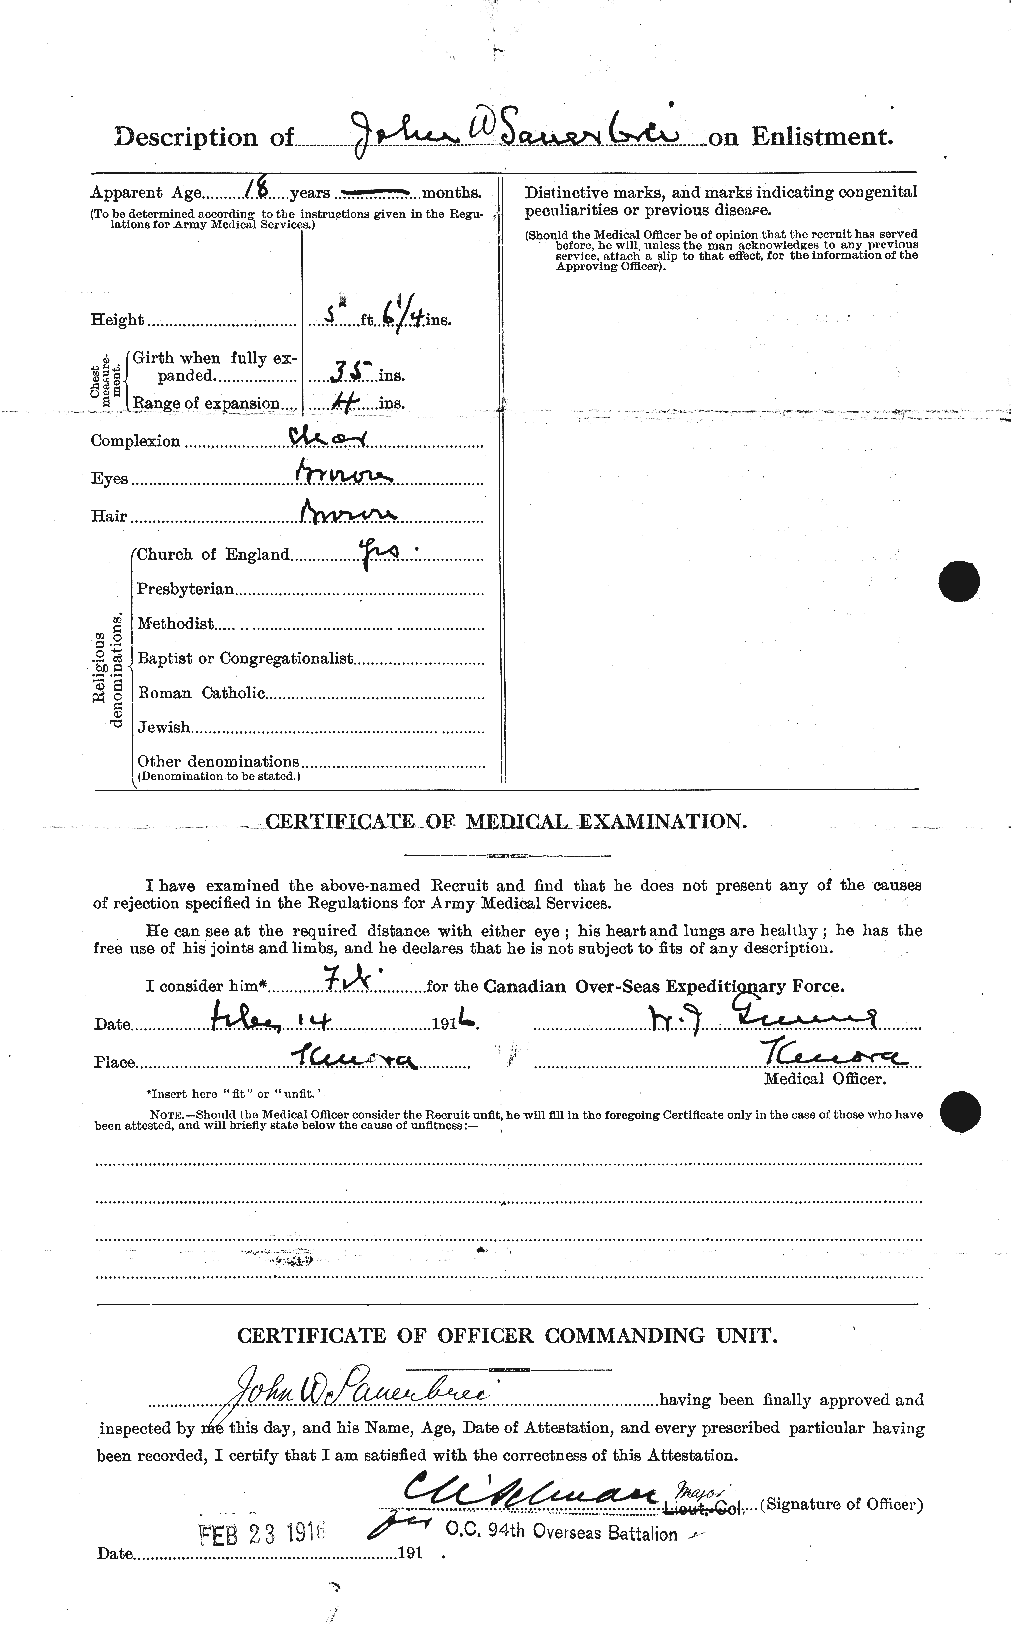 Personnel Records of the First World War - CEF 083160b